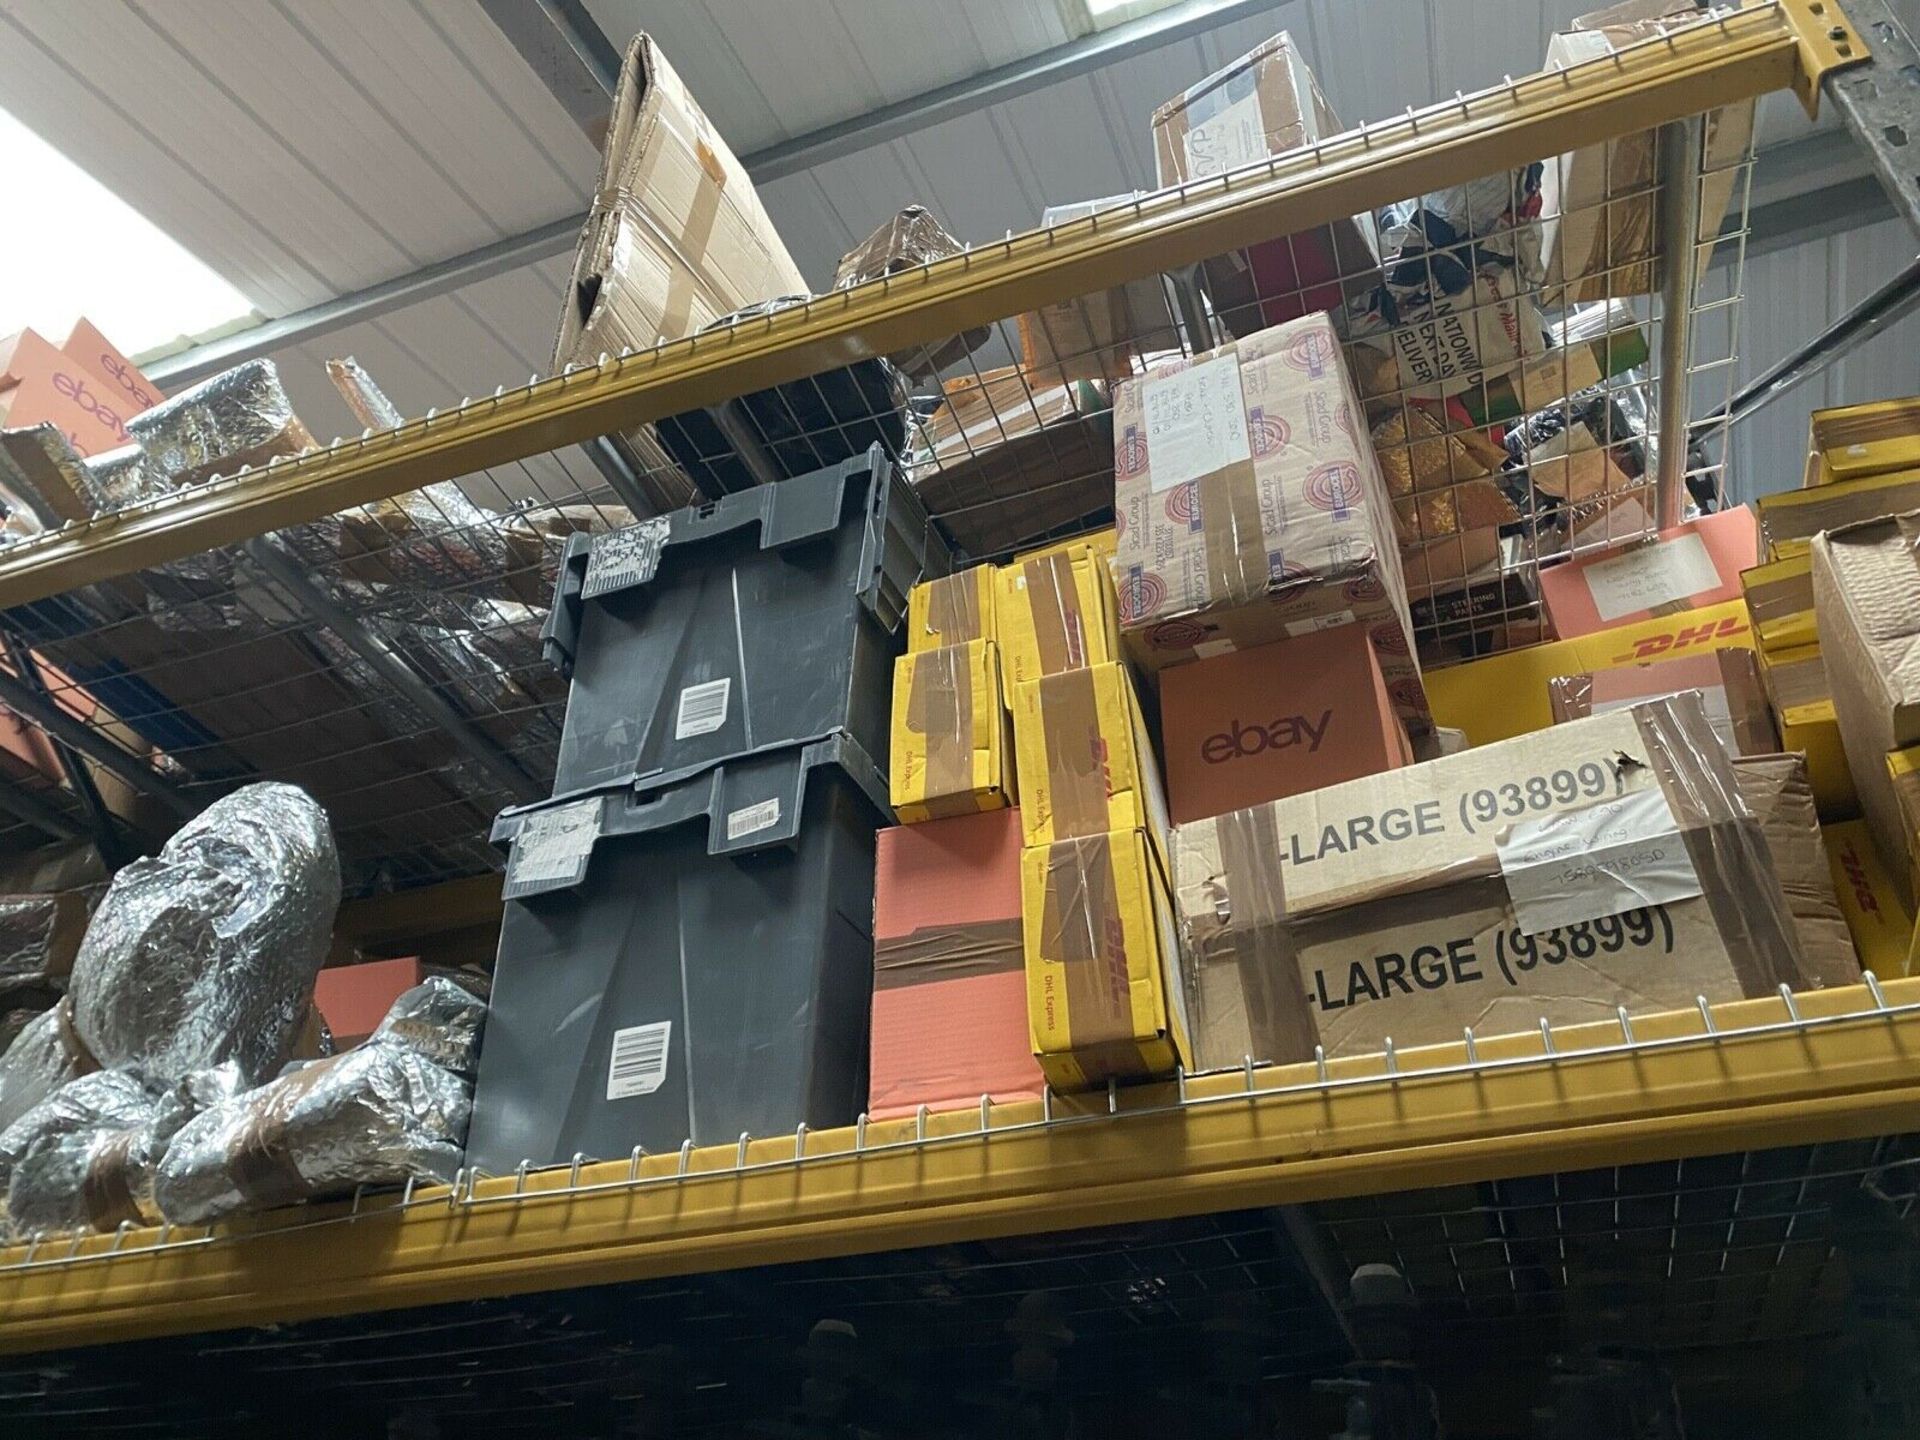 BULK ITEMS JOB LOT OF USED CAR PARTS - £350K ONGOING BUSINESS STOCK CLEARANCE FOR SALE! *NO VAT* - Image 38 of 95